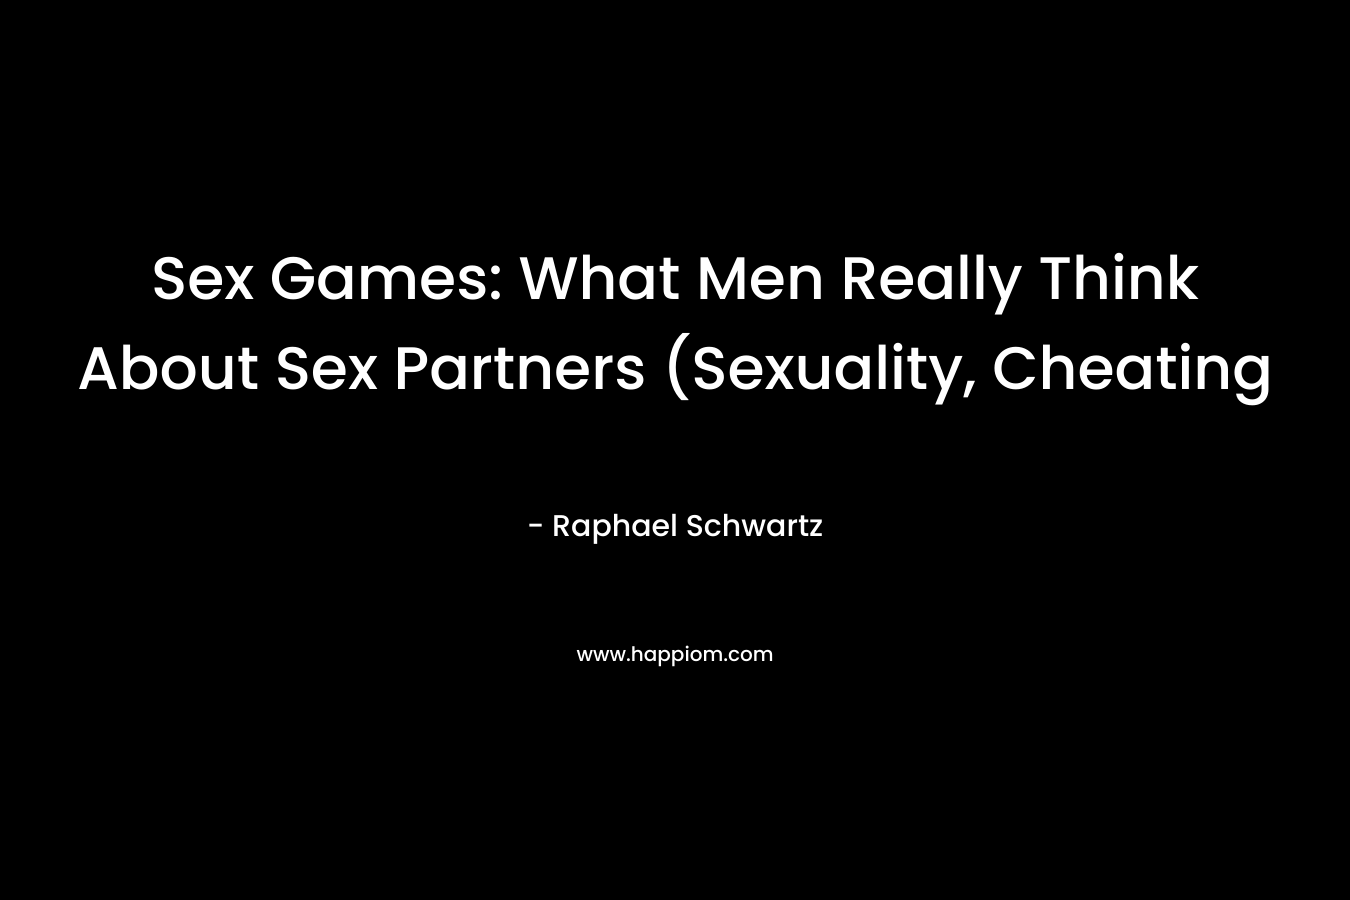 Sex Games: What Men Really Think About Sex Partners (Sexuality, Cheating